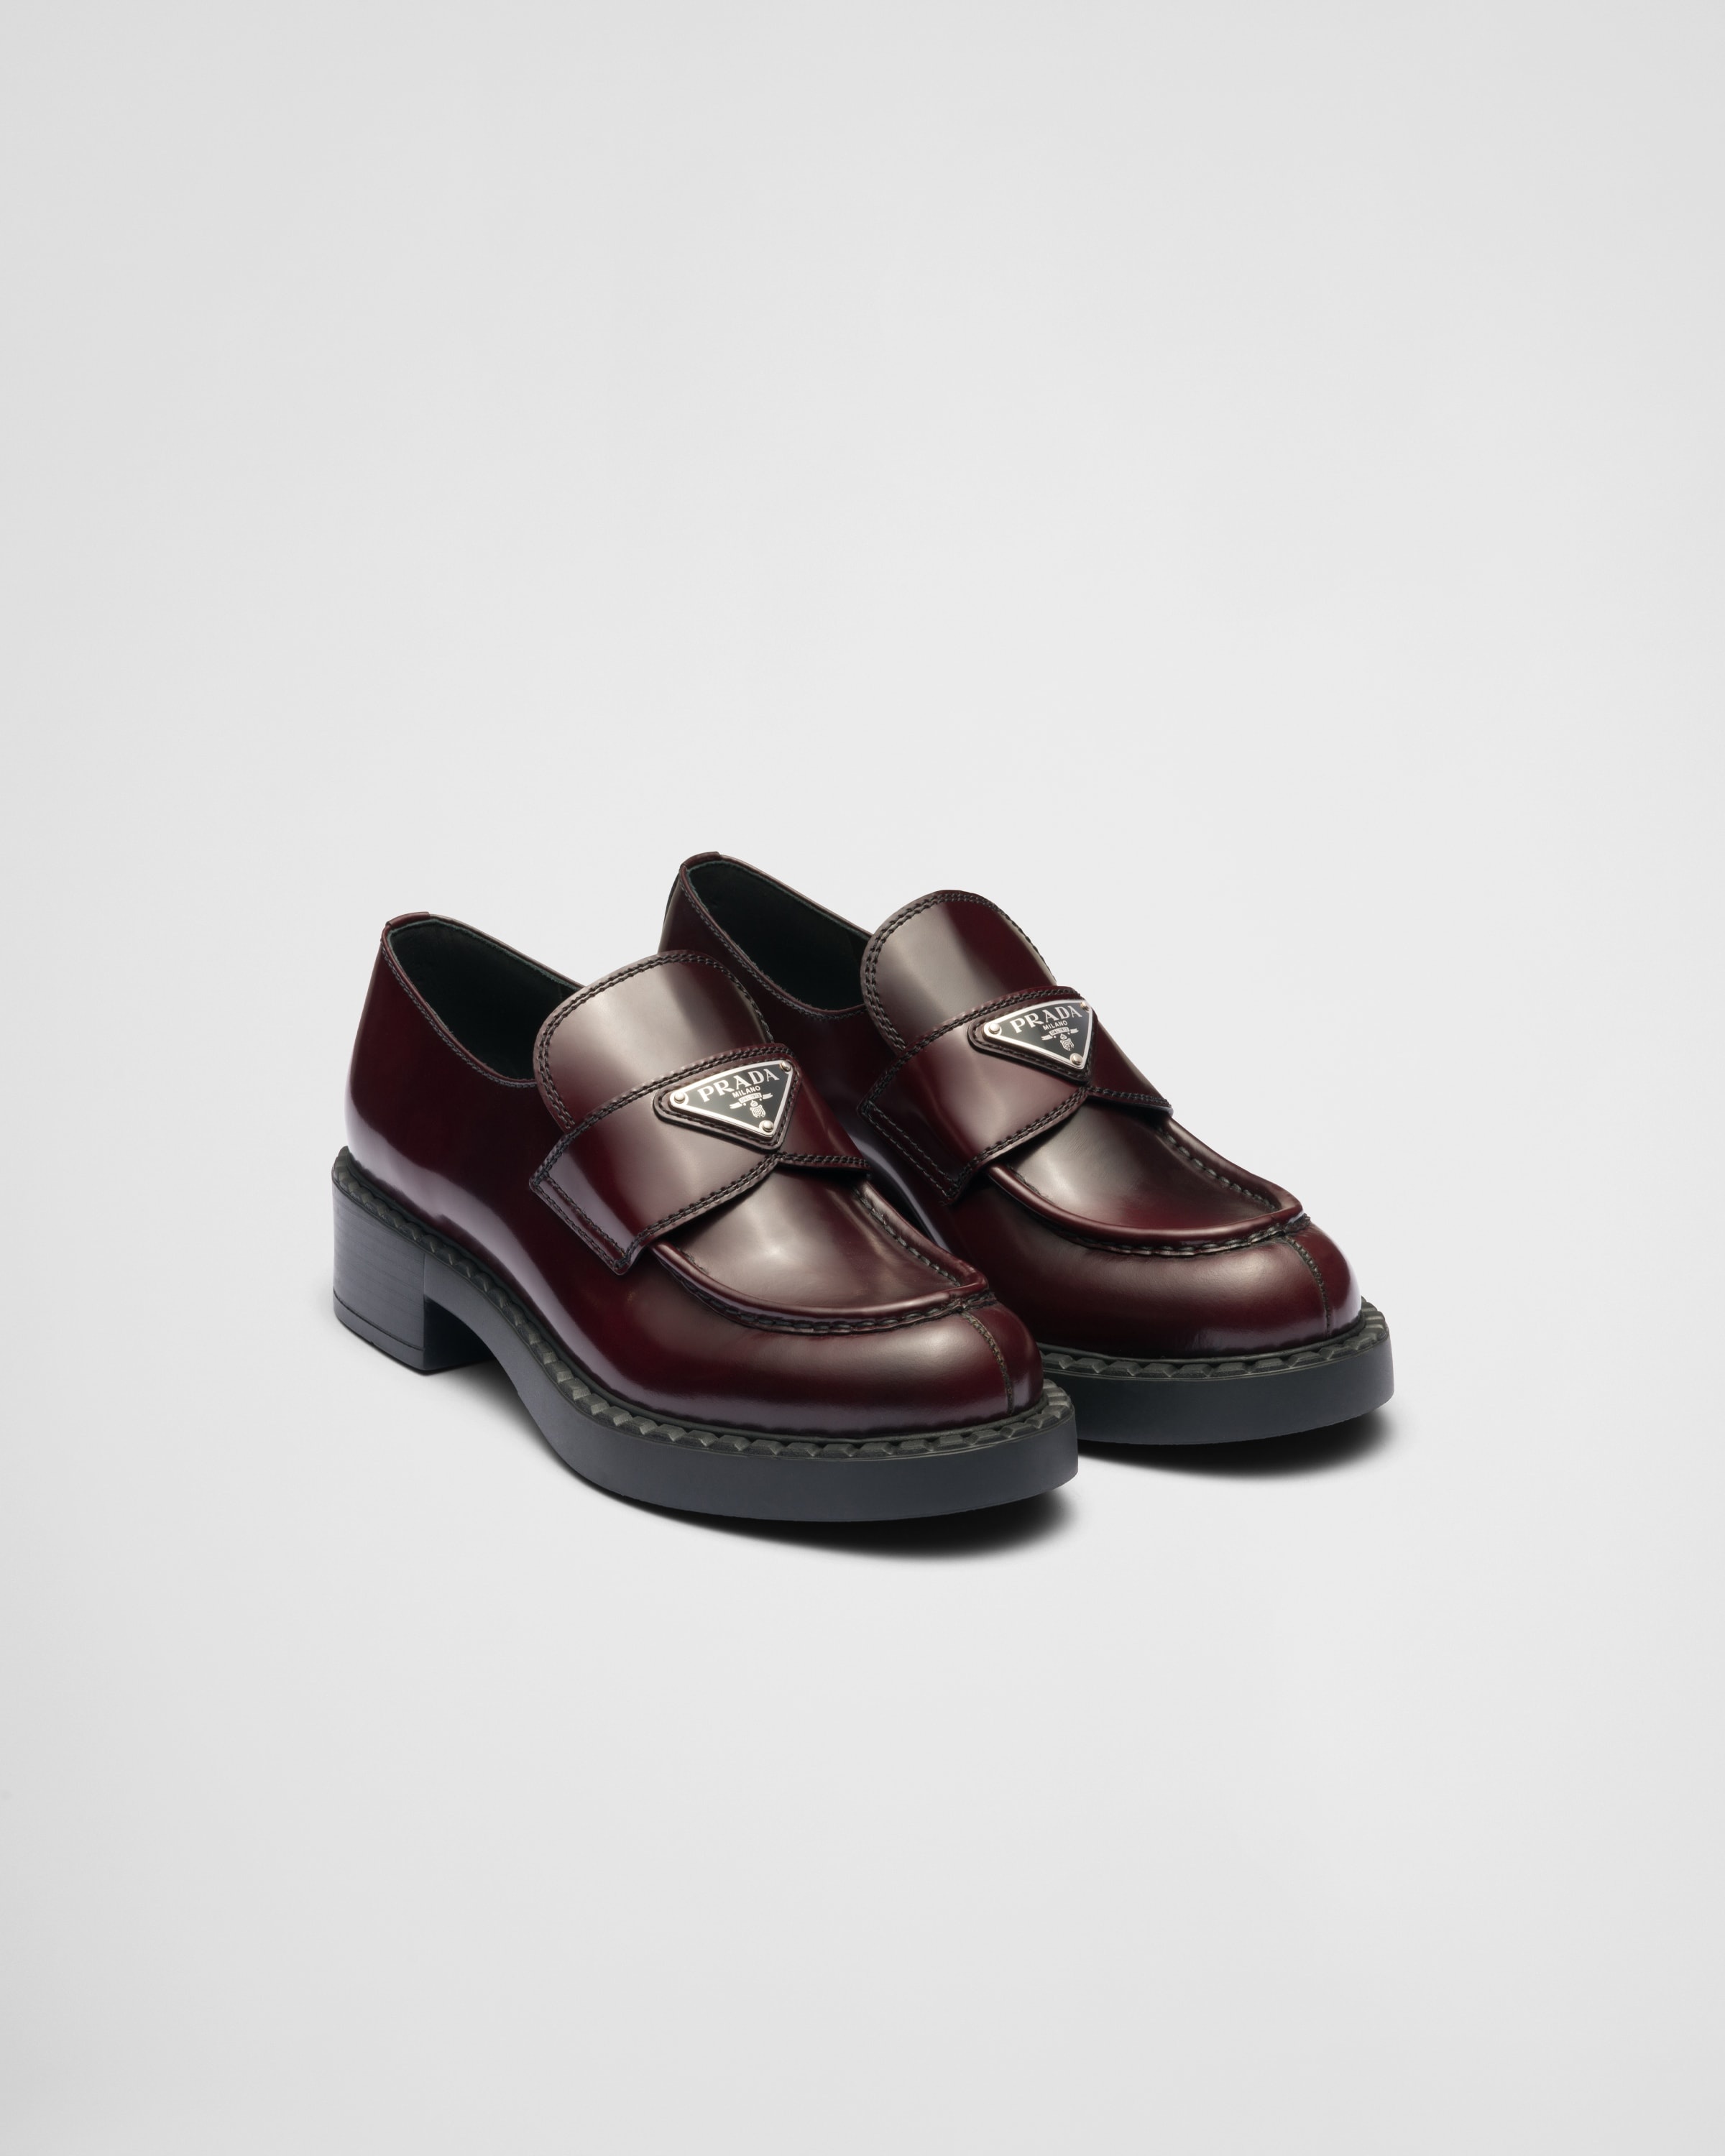 Prada Chocolate brushed leather loafers | REVERSIBLE